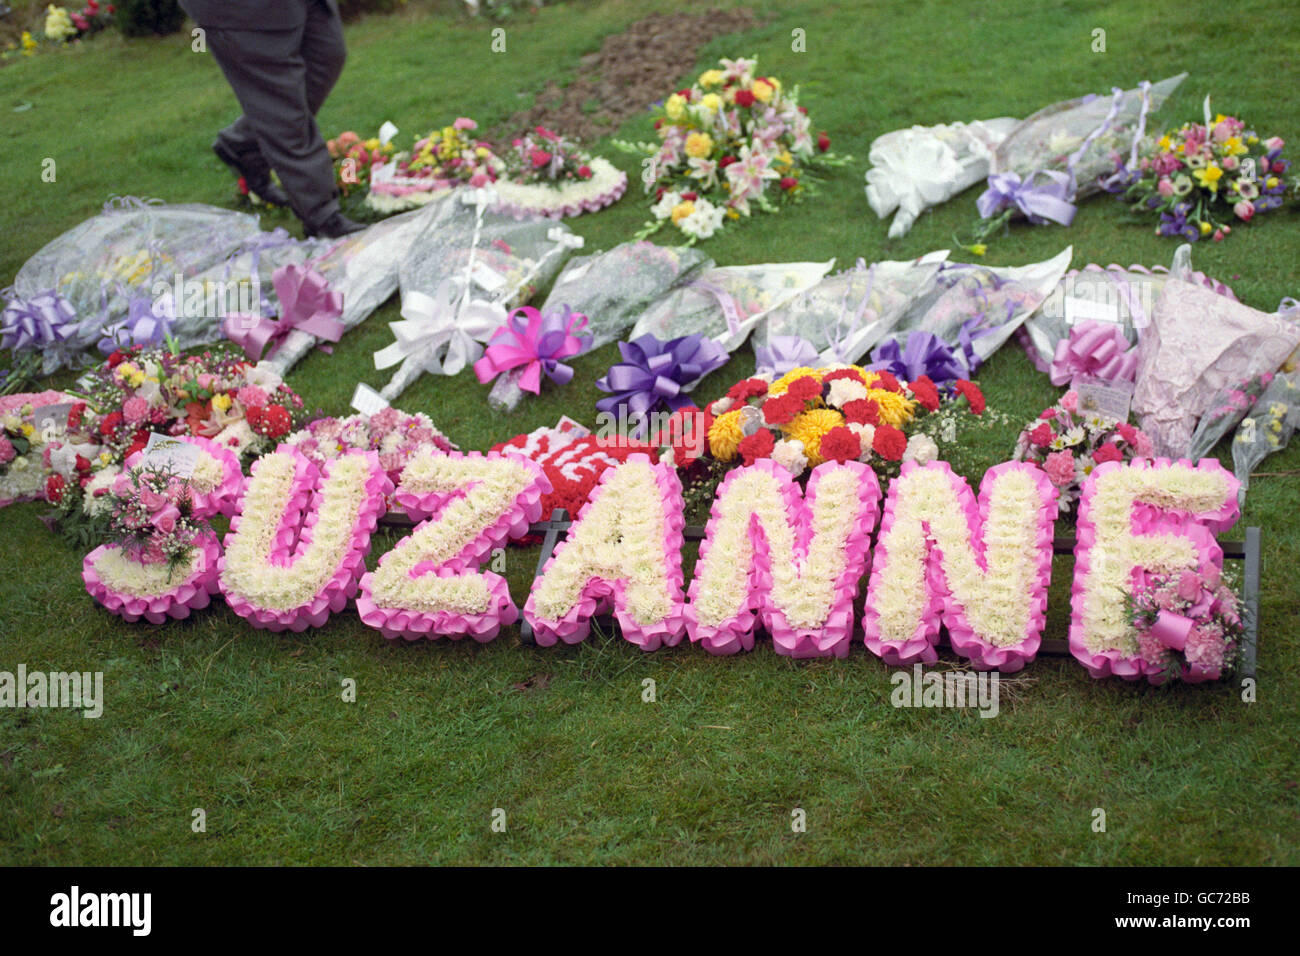 Crime - Murder of Suzanne Capper - Manchester. FLORAL TRIBUTES TO MURDERED TEENAGER SUZANNE CAPPER AT THE BLACKLEY CEMENTRY. Stock Photo